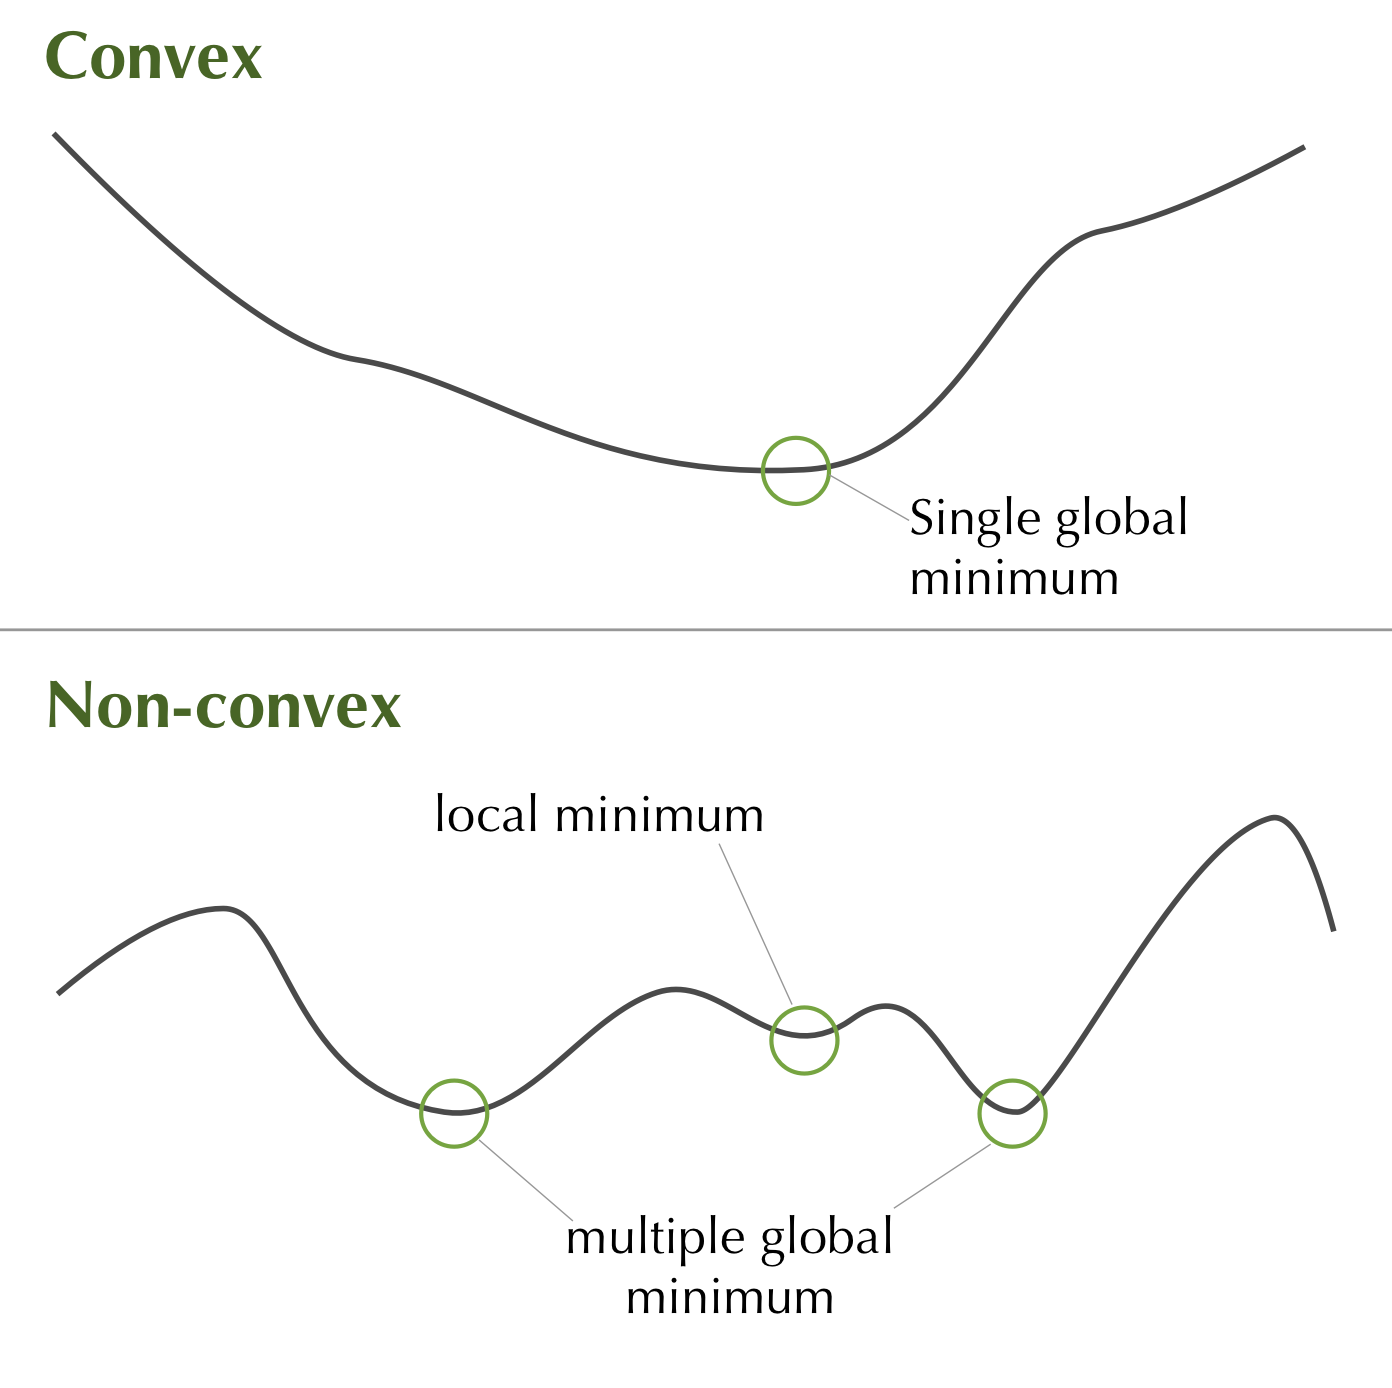 Comparison of the objective surface of a convex and non-convex optimization problem.